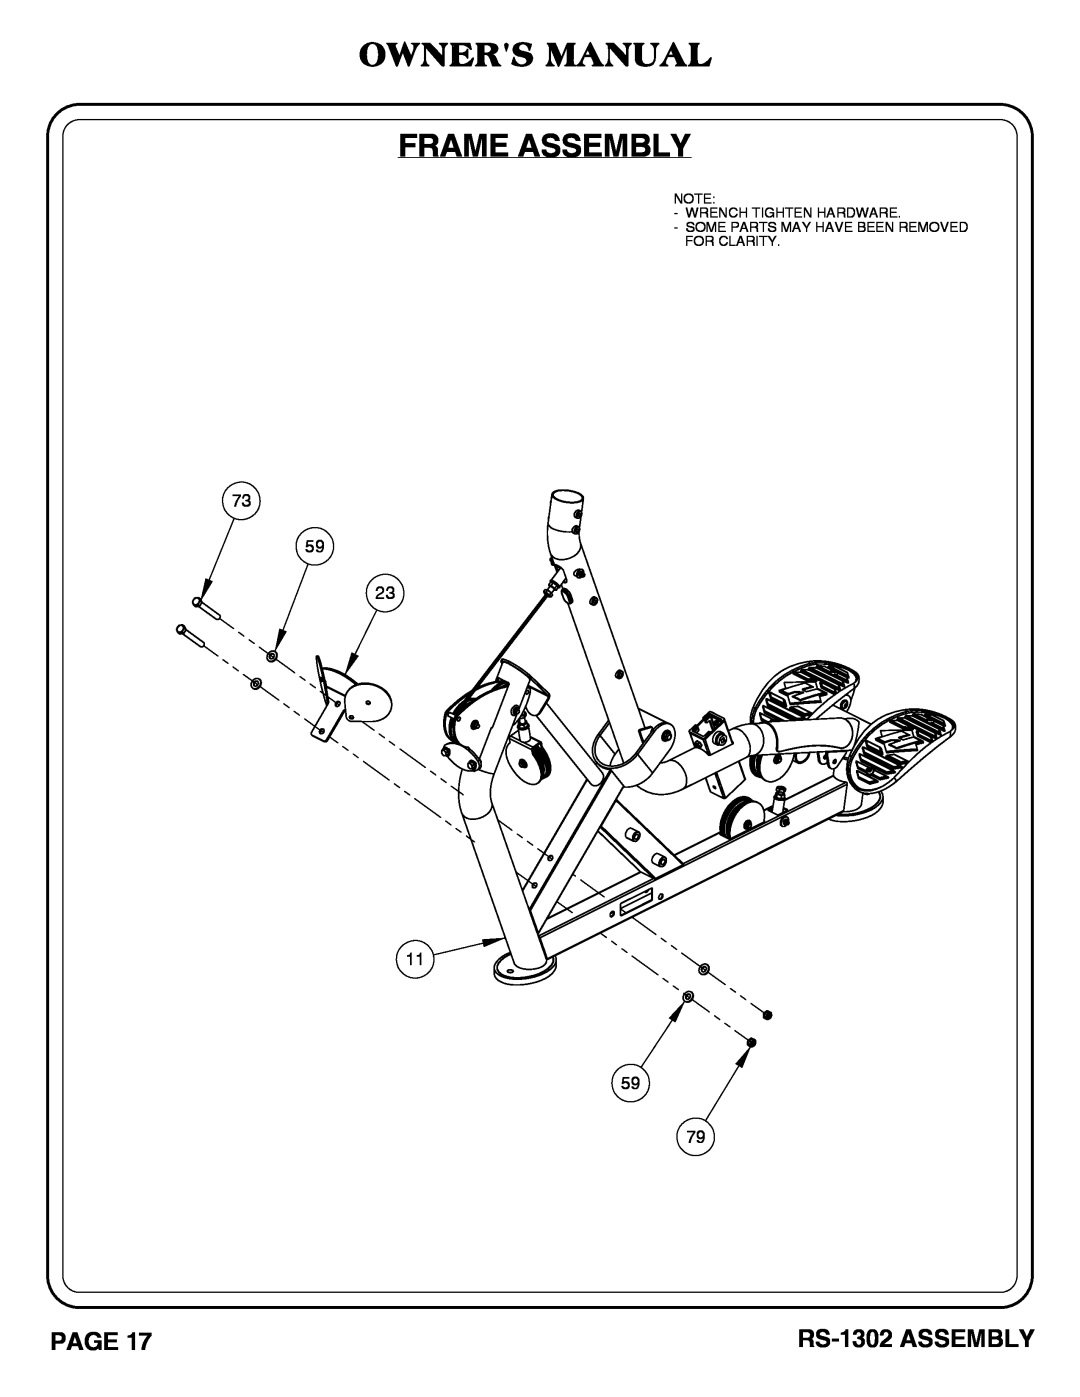 Hoist Fitness owner manual Owners Manual Frame Assembly, Page, RS-1302 ASSEMBLY 